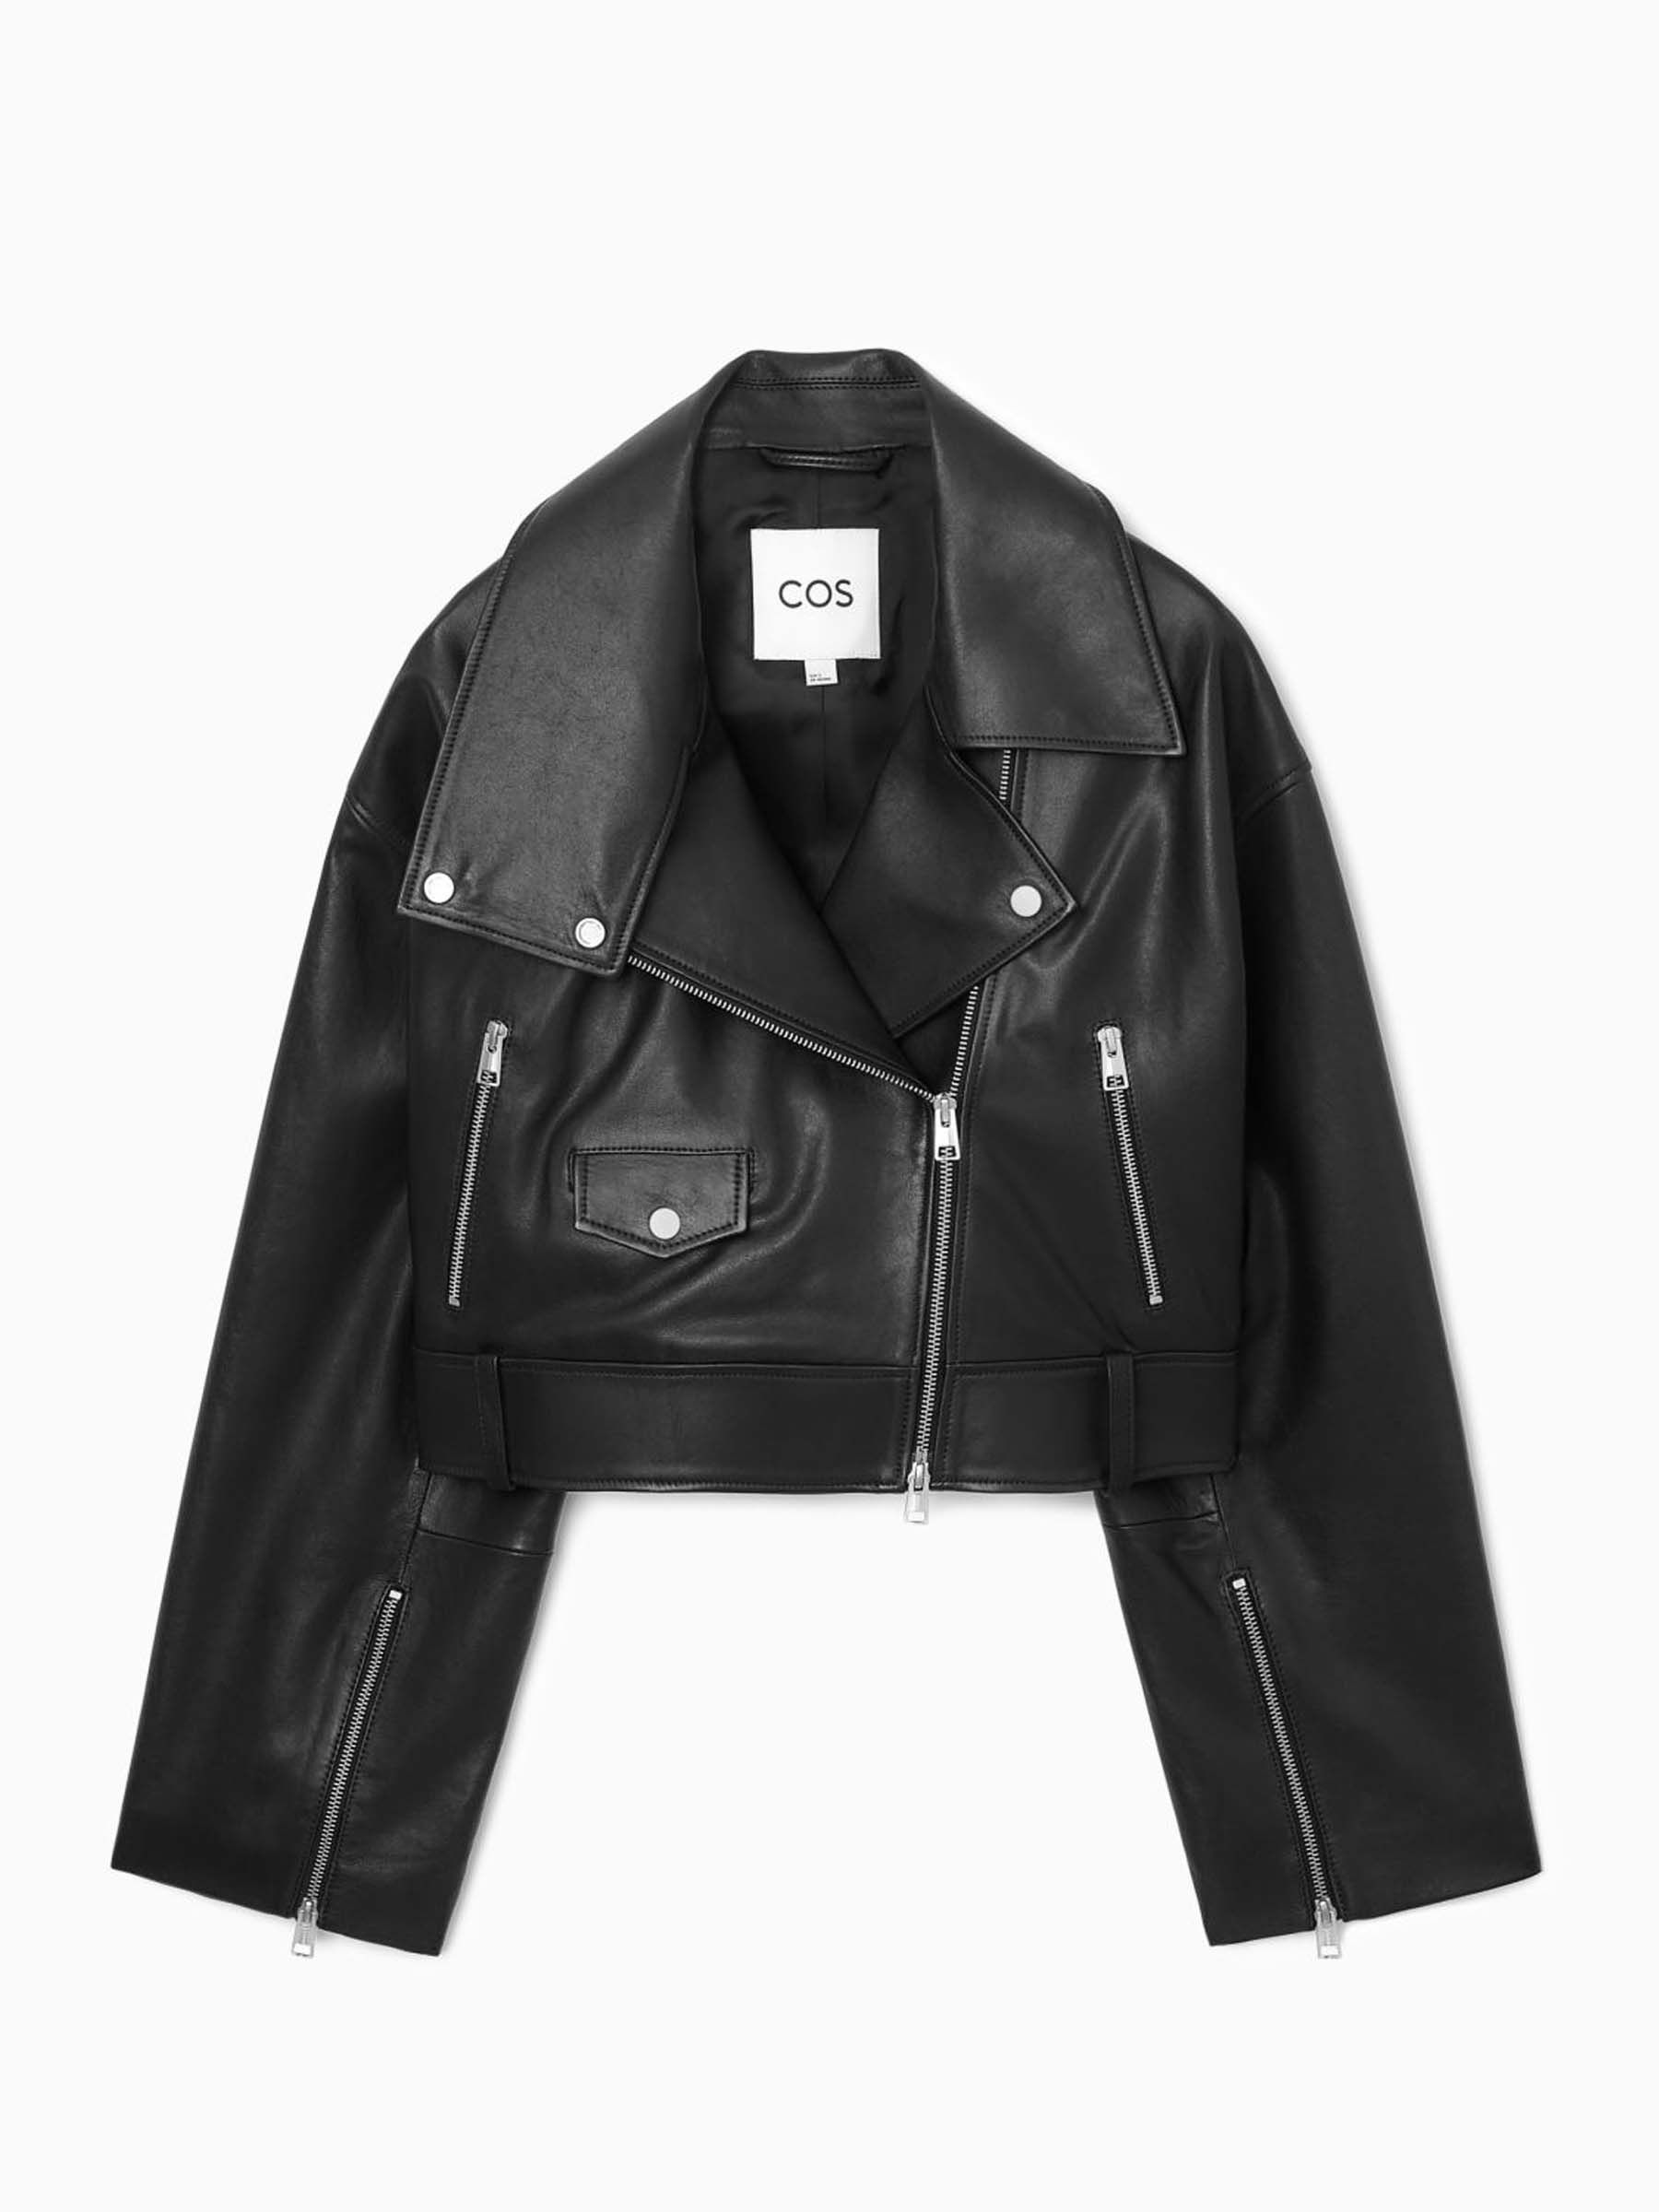 Cool leather jackets to buy now and wear forever